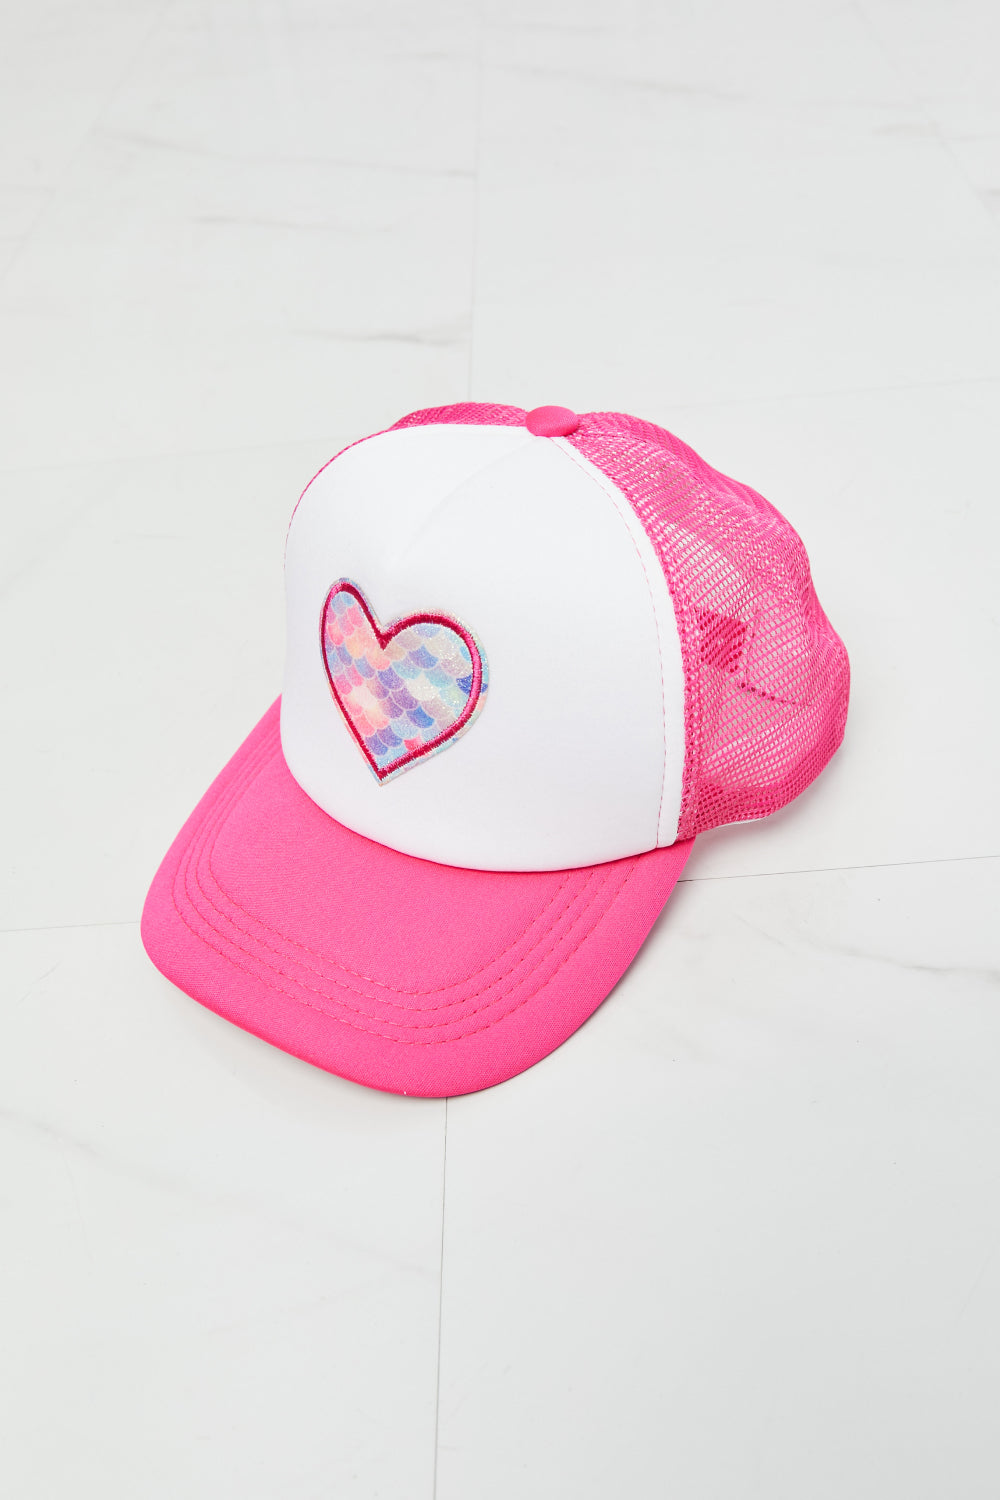 Fame Falling For You Trucker Hat in Pink - Tigbuls Variety Fashion